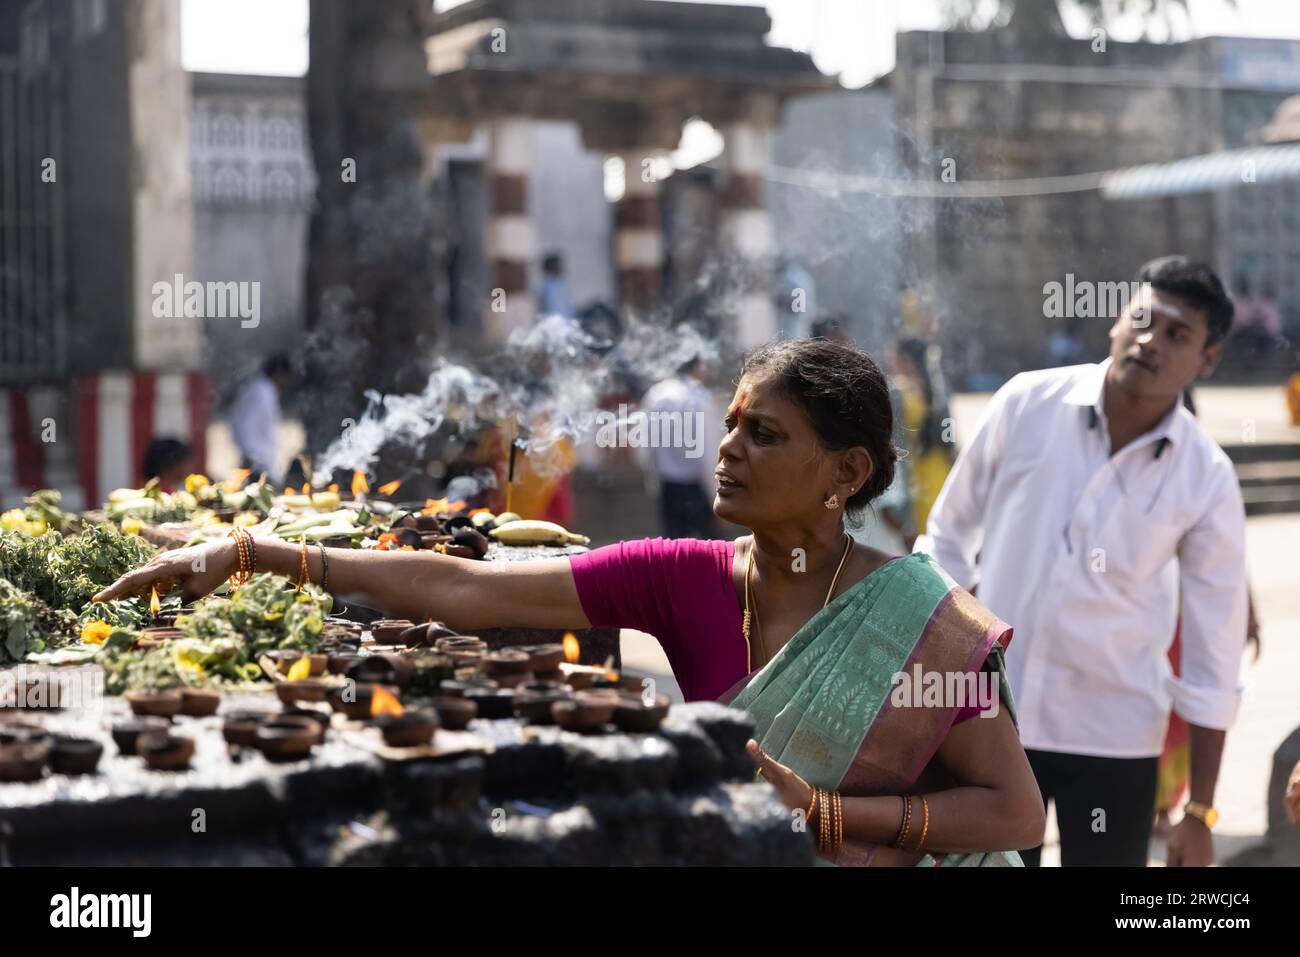 January 11, 2023, in South India, pilgrims visit an ancient Hindu temple during the night. High quality photo Stock Photo